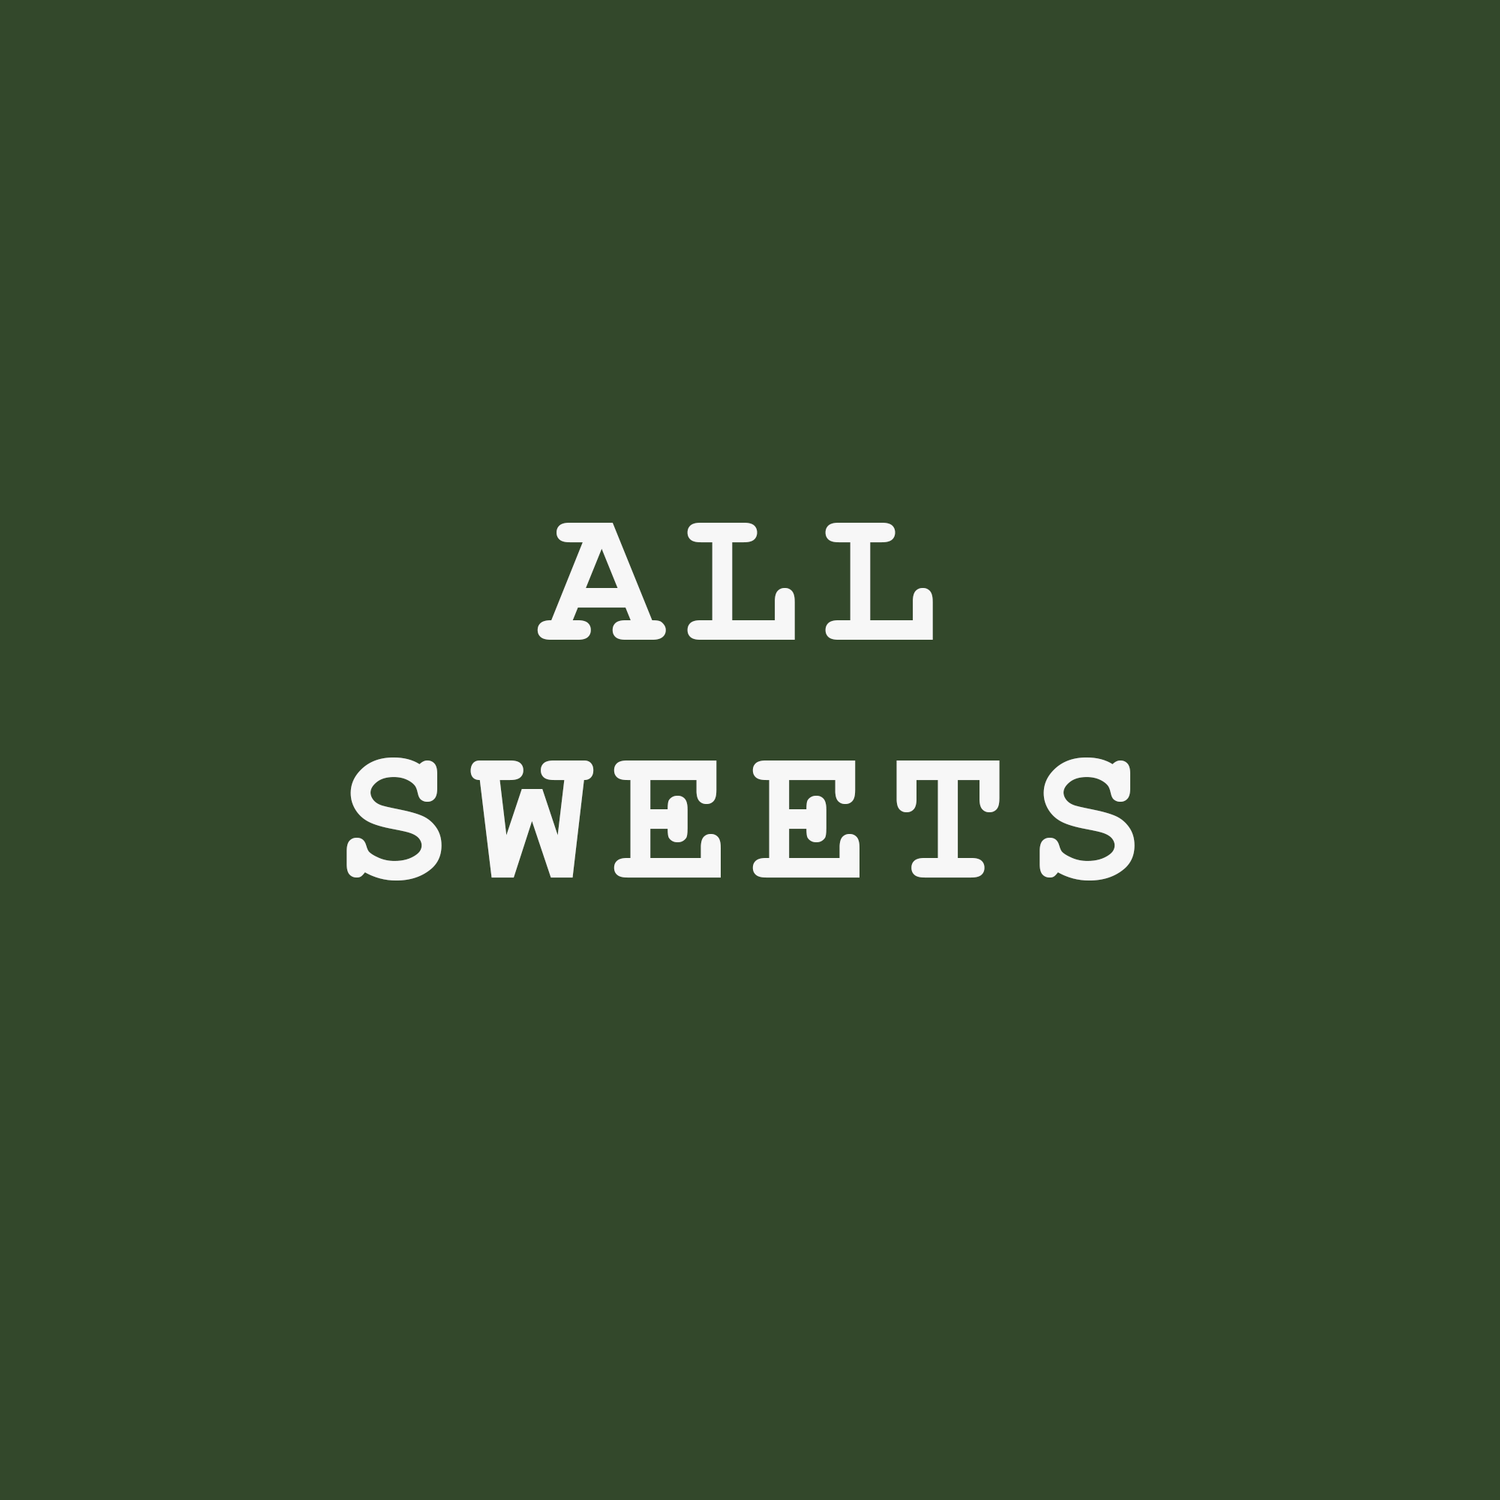 All Sweets